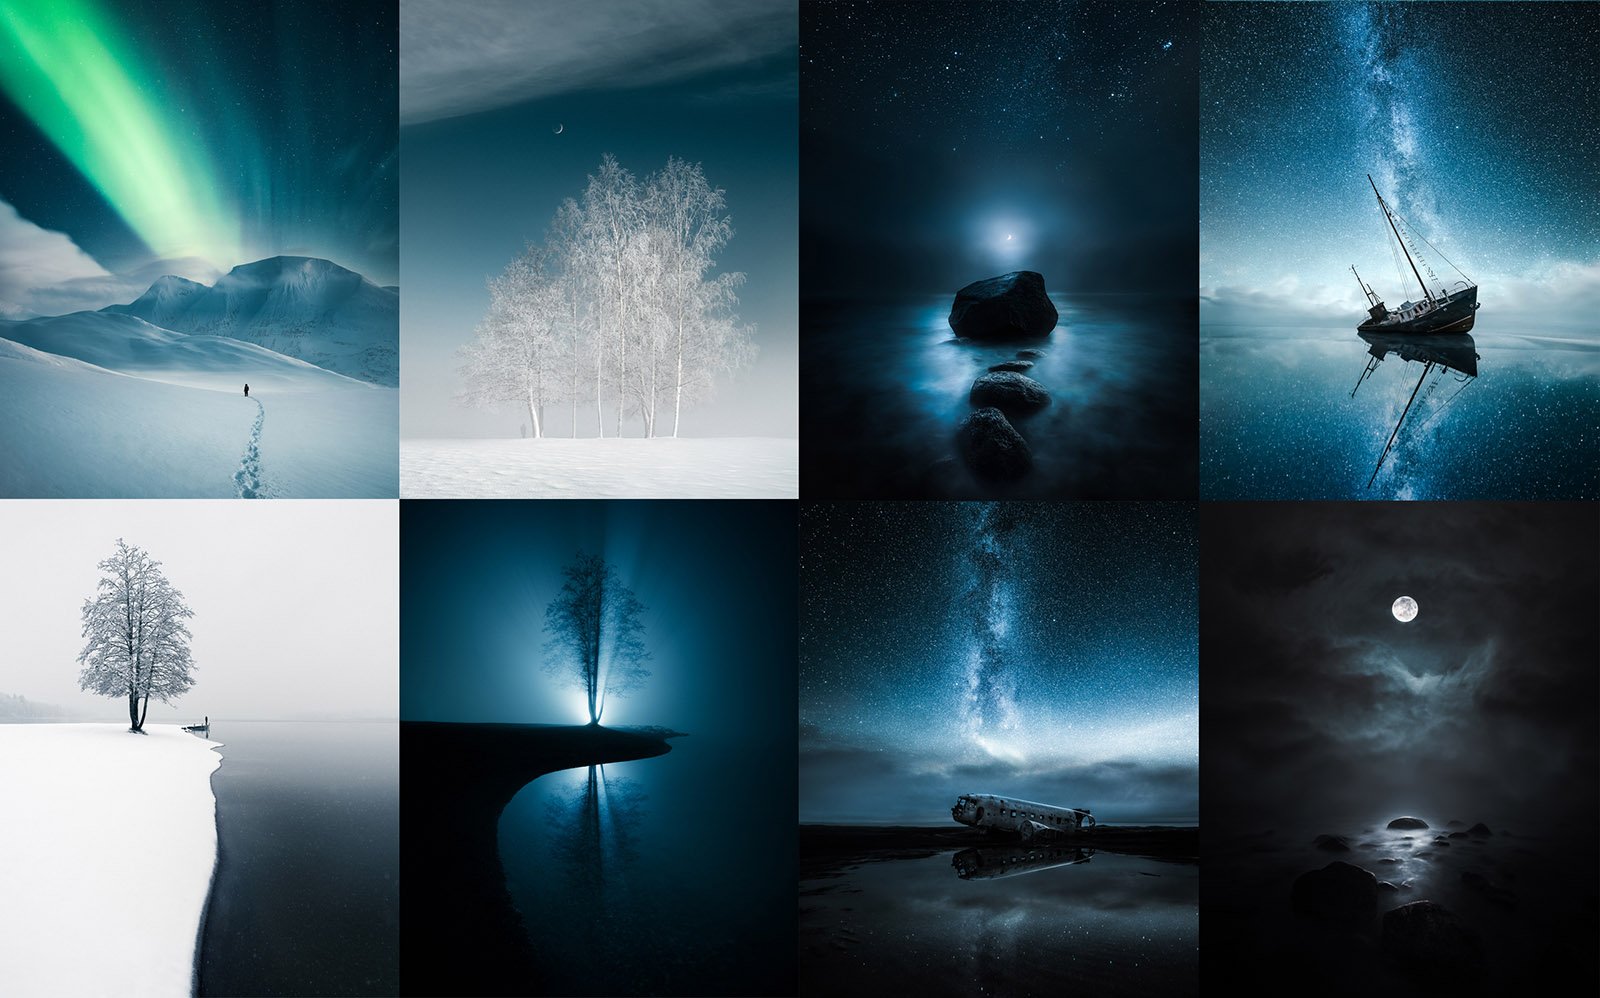 Learn Photography and Post-Processing from Mikko Lagerstedt